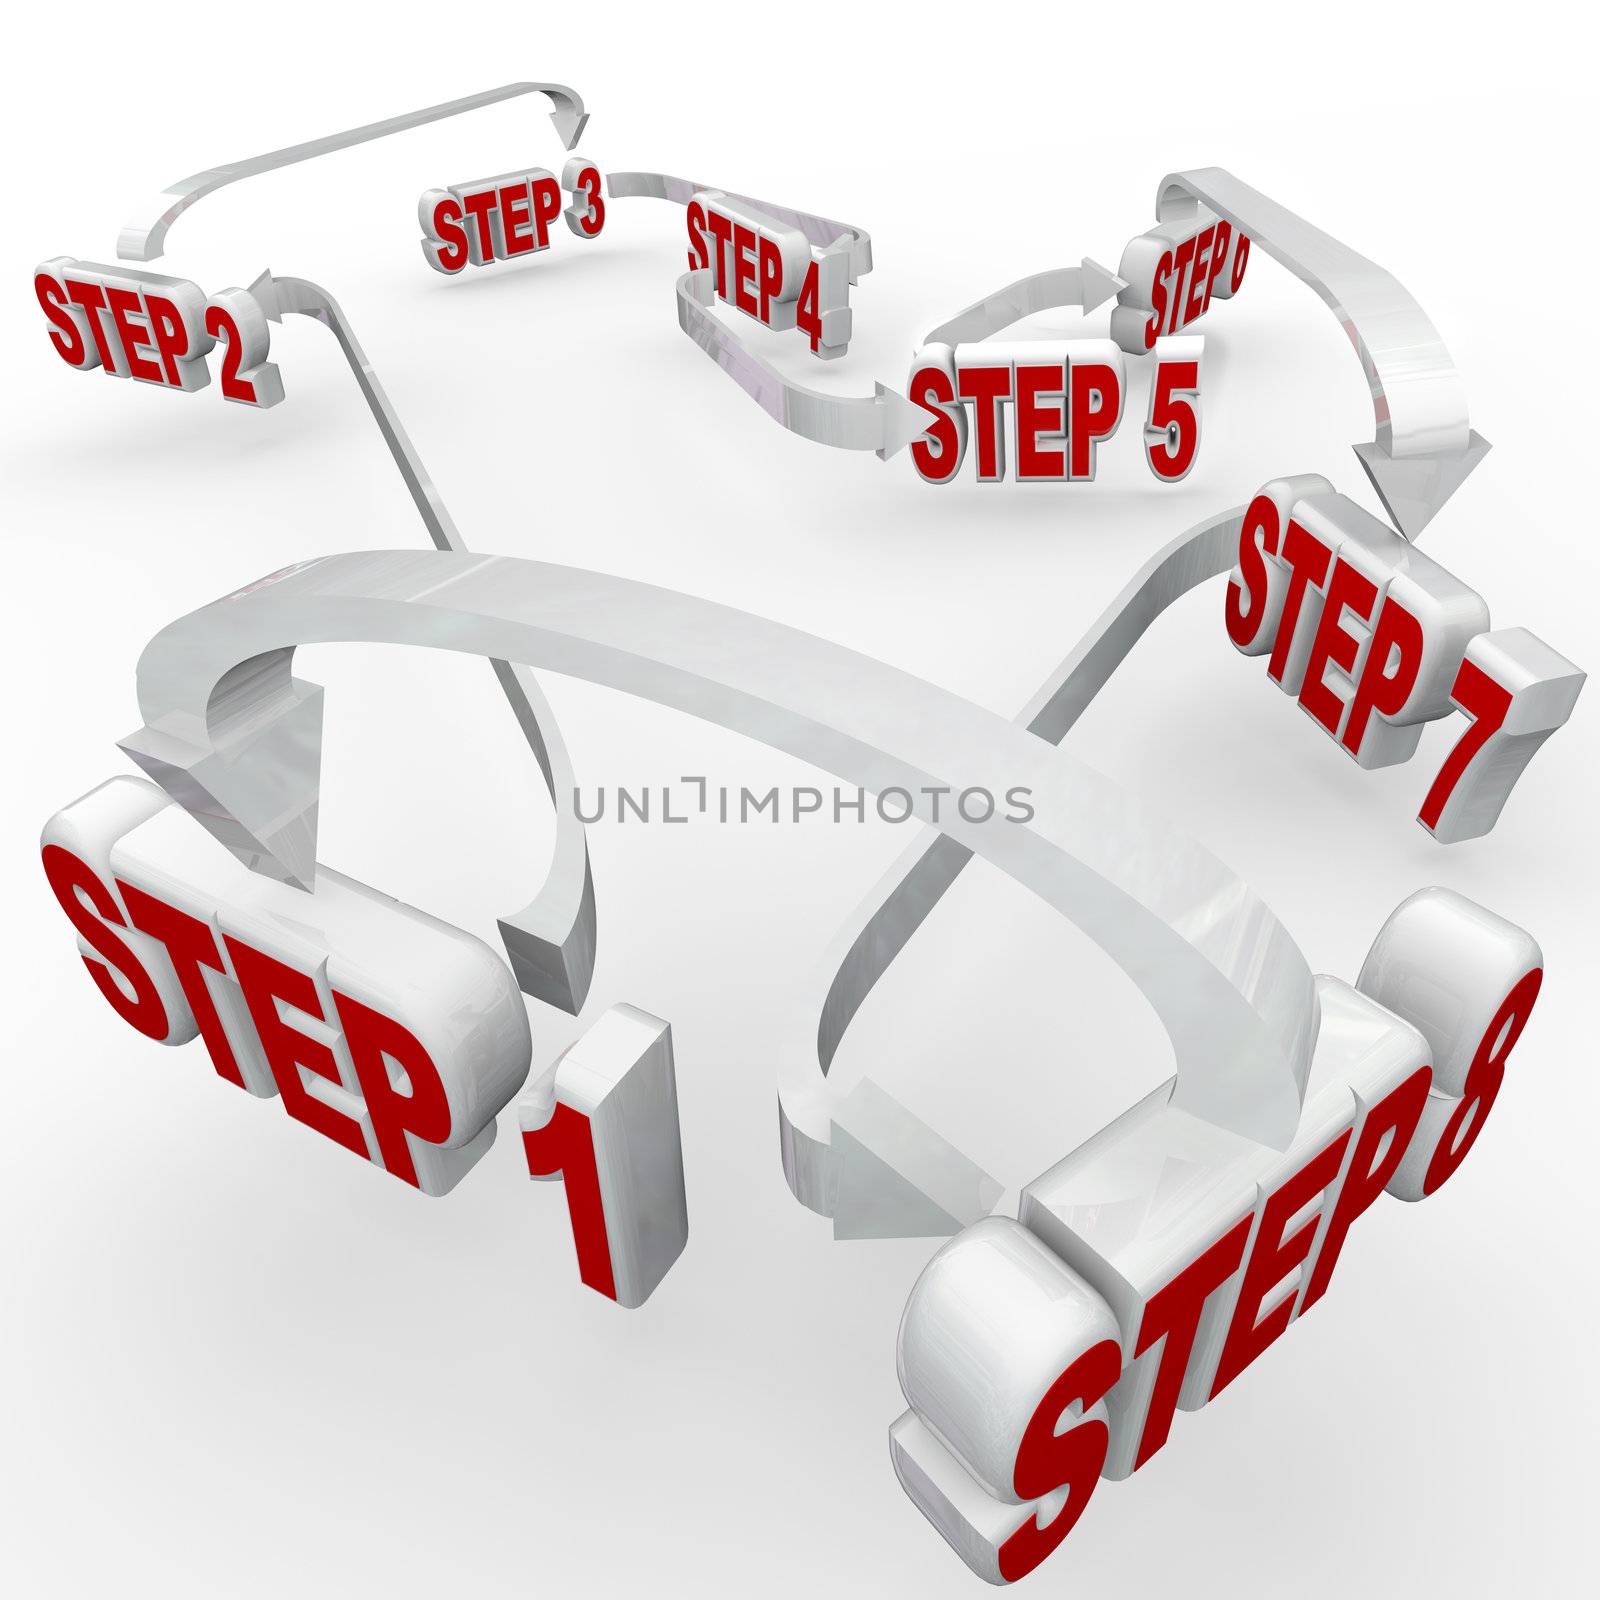 Many steps, numbered 1 through 8, connected in a flowchart diagram to give you instructions on completing a complex project or performing a complicated task